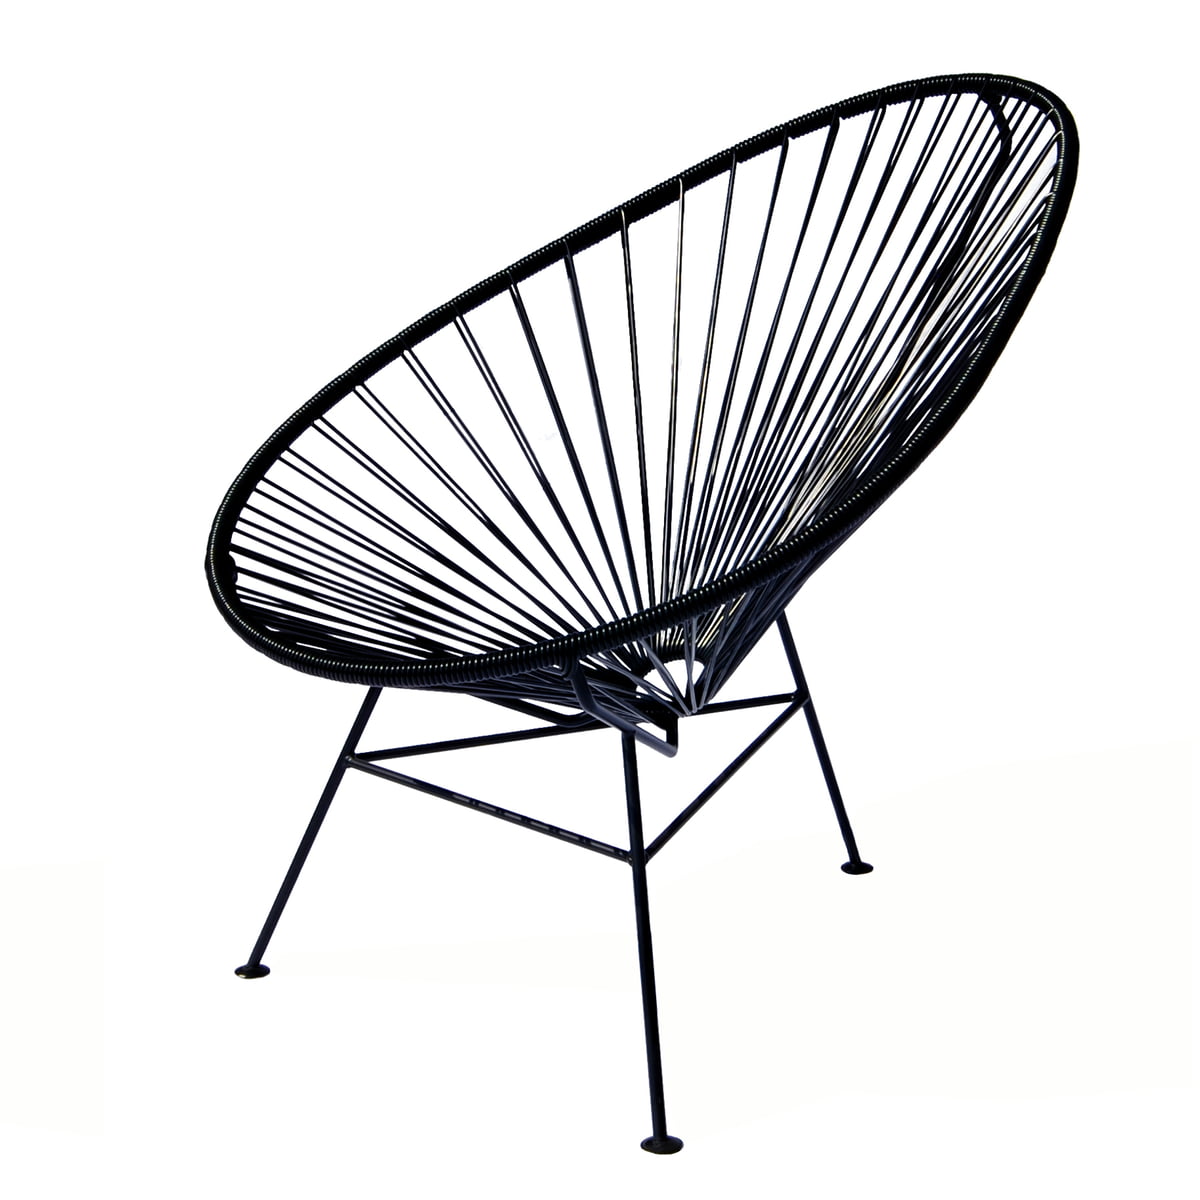 Ophef hoofdstad rit The OK Design Acapulco Chair in the shop